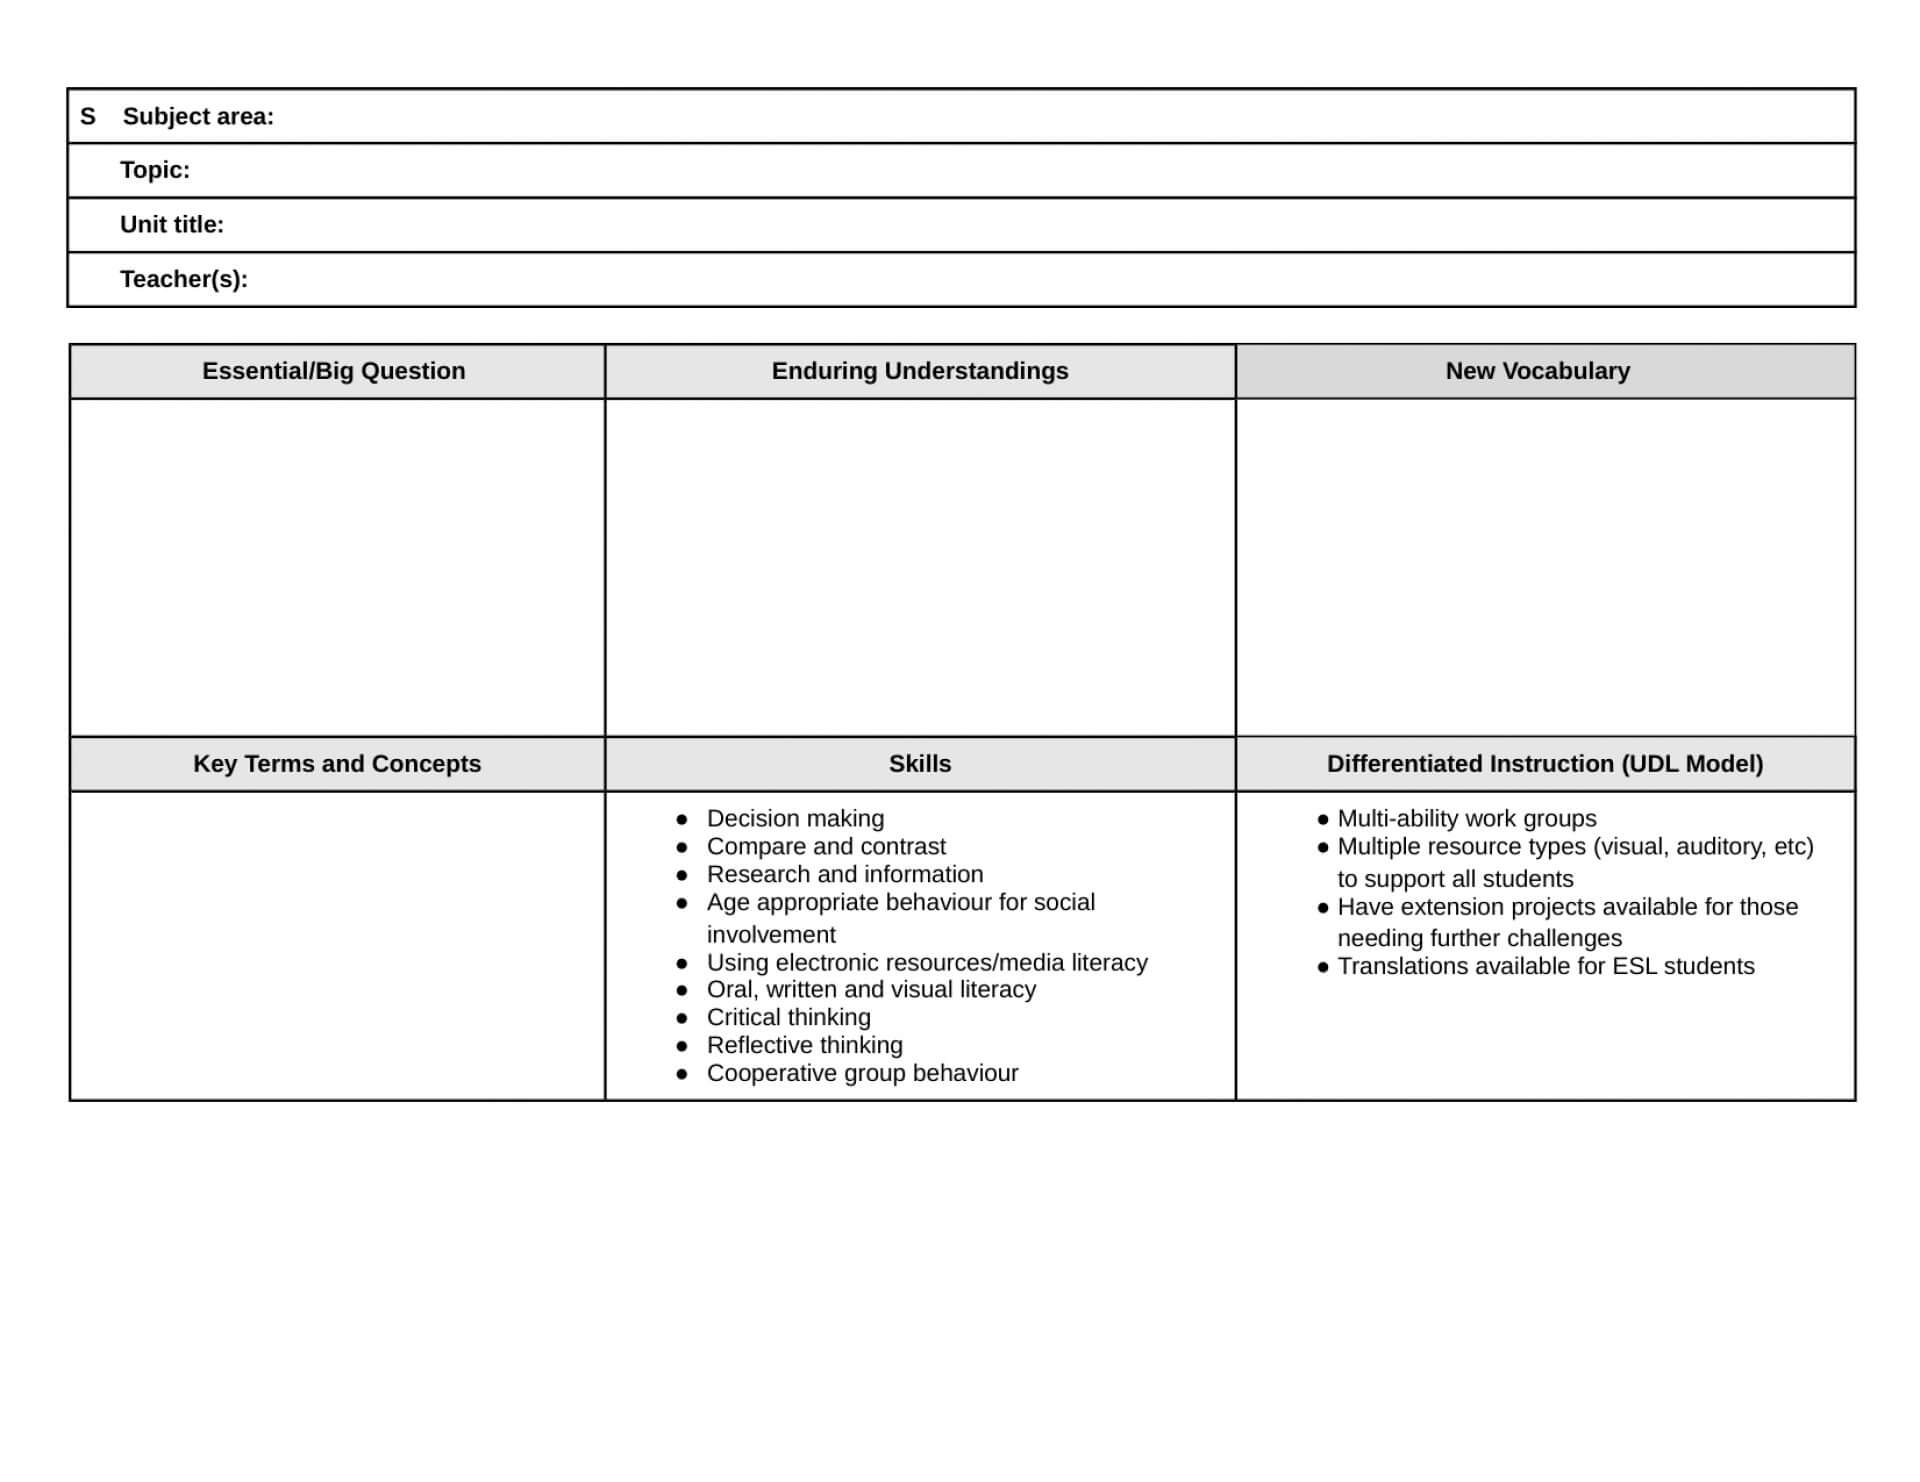 036 Template Ideas Unit Lesson Plan Programming Course Intended For Blank Unit Lesson Plan Template